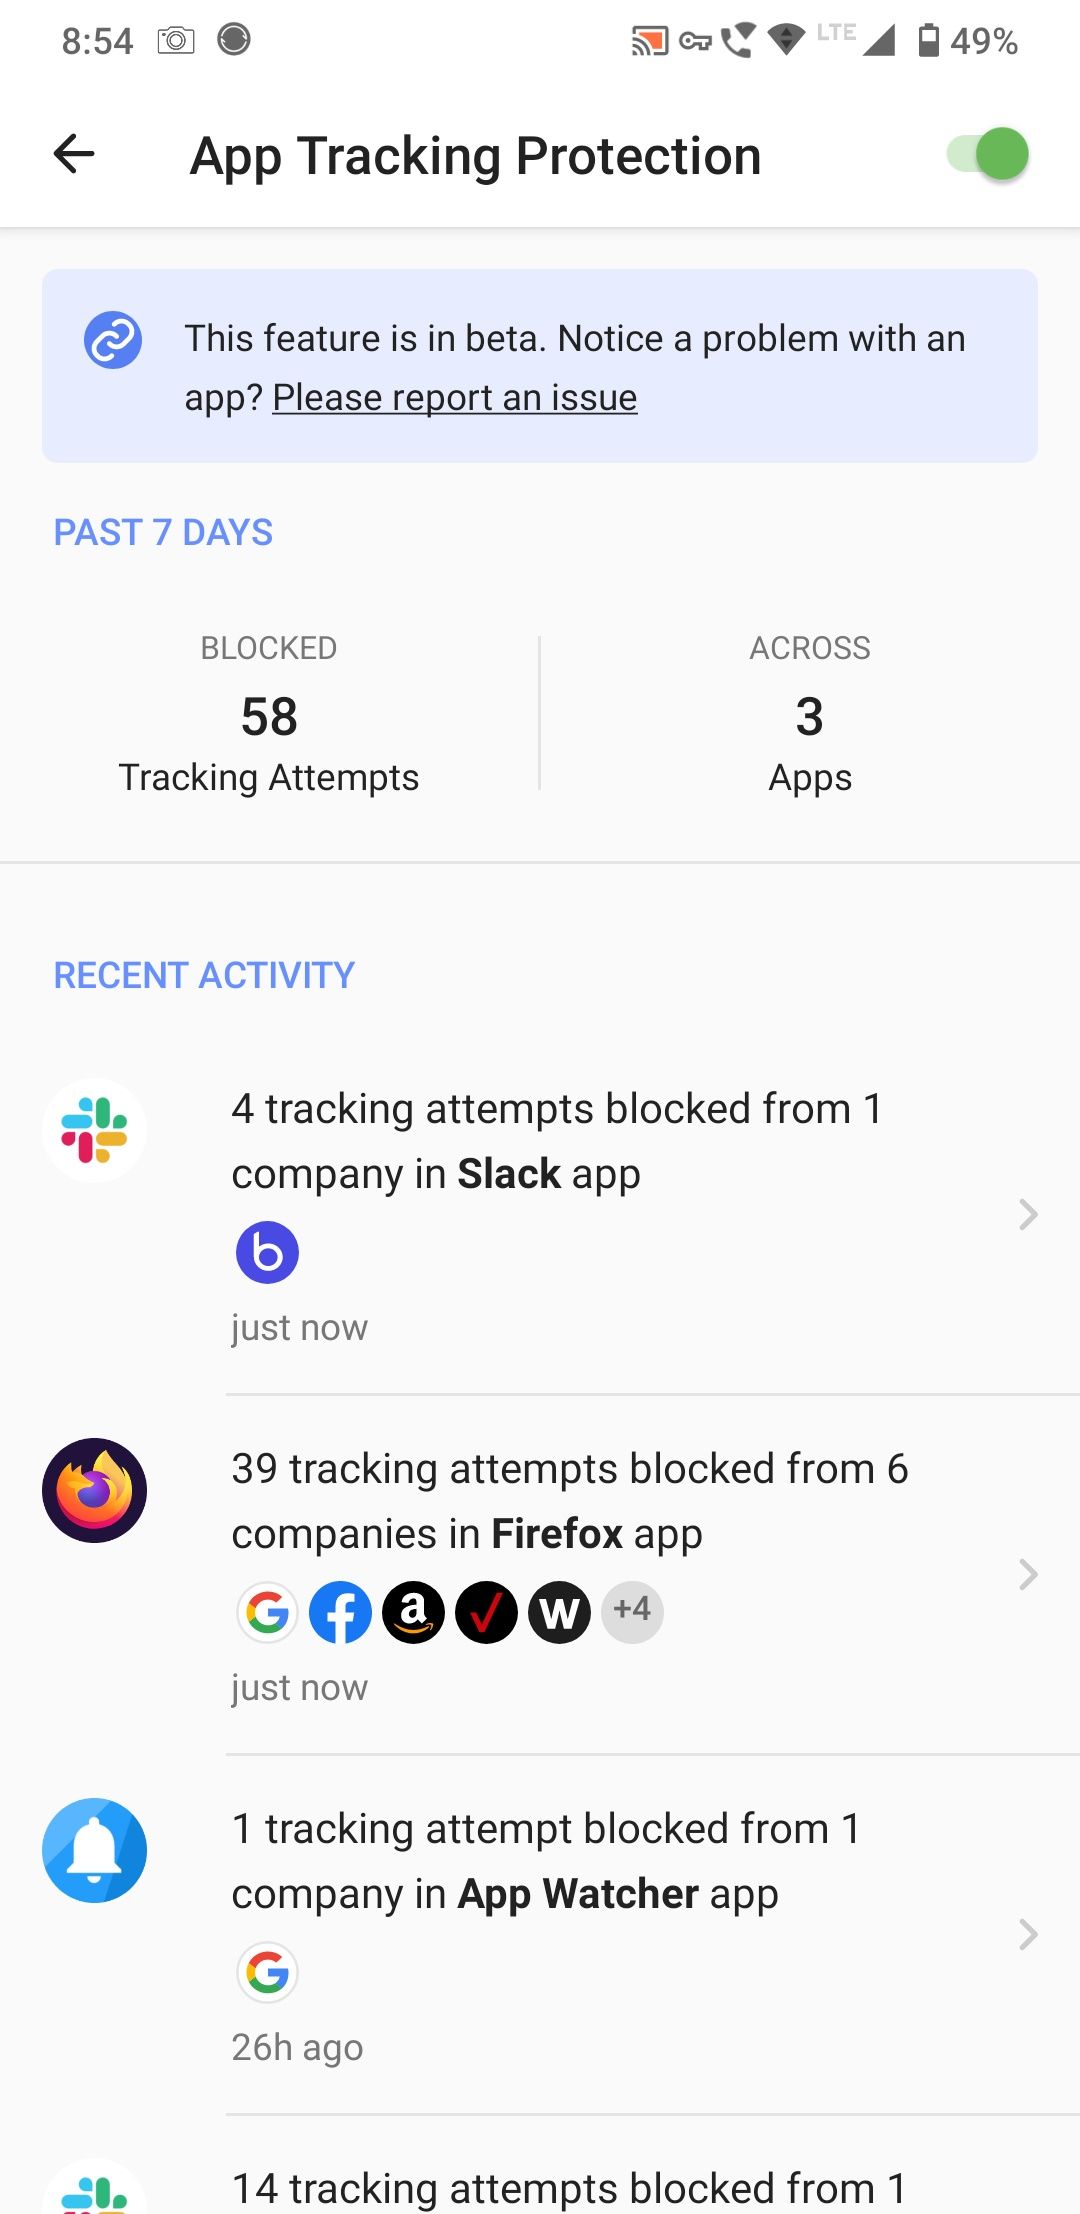 app tracking protection in action